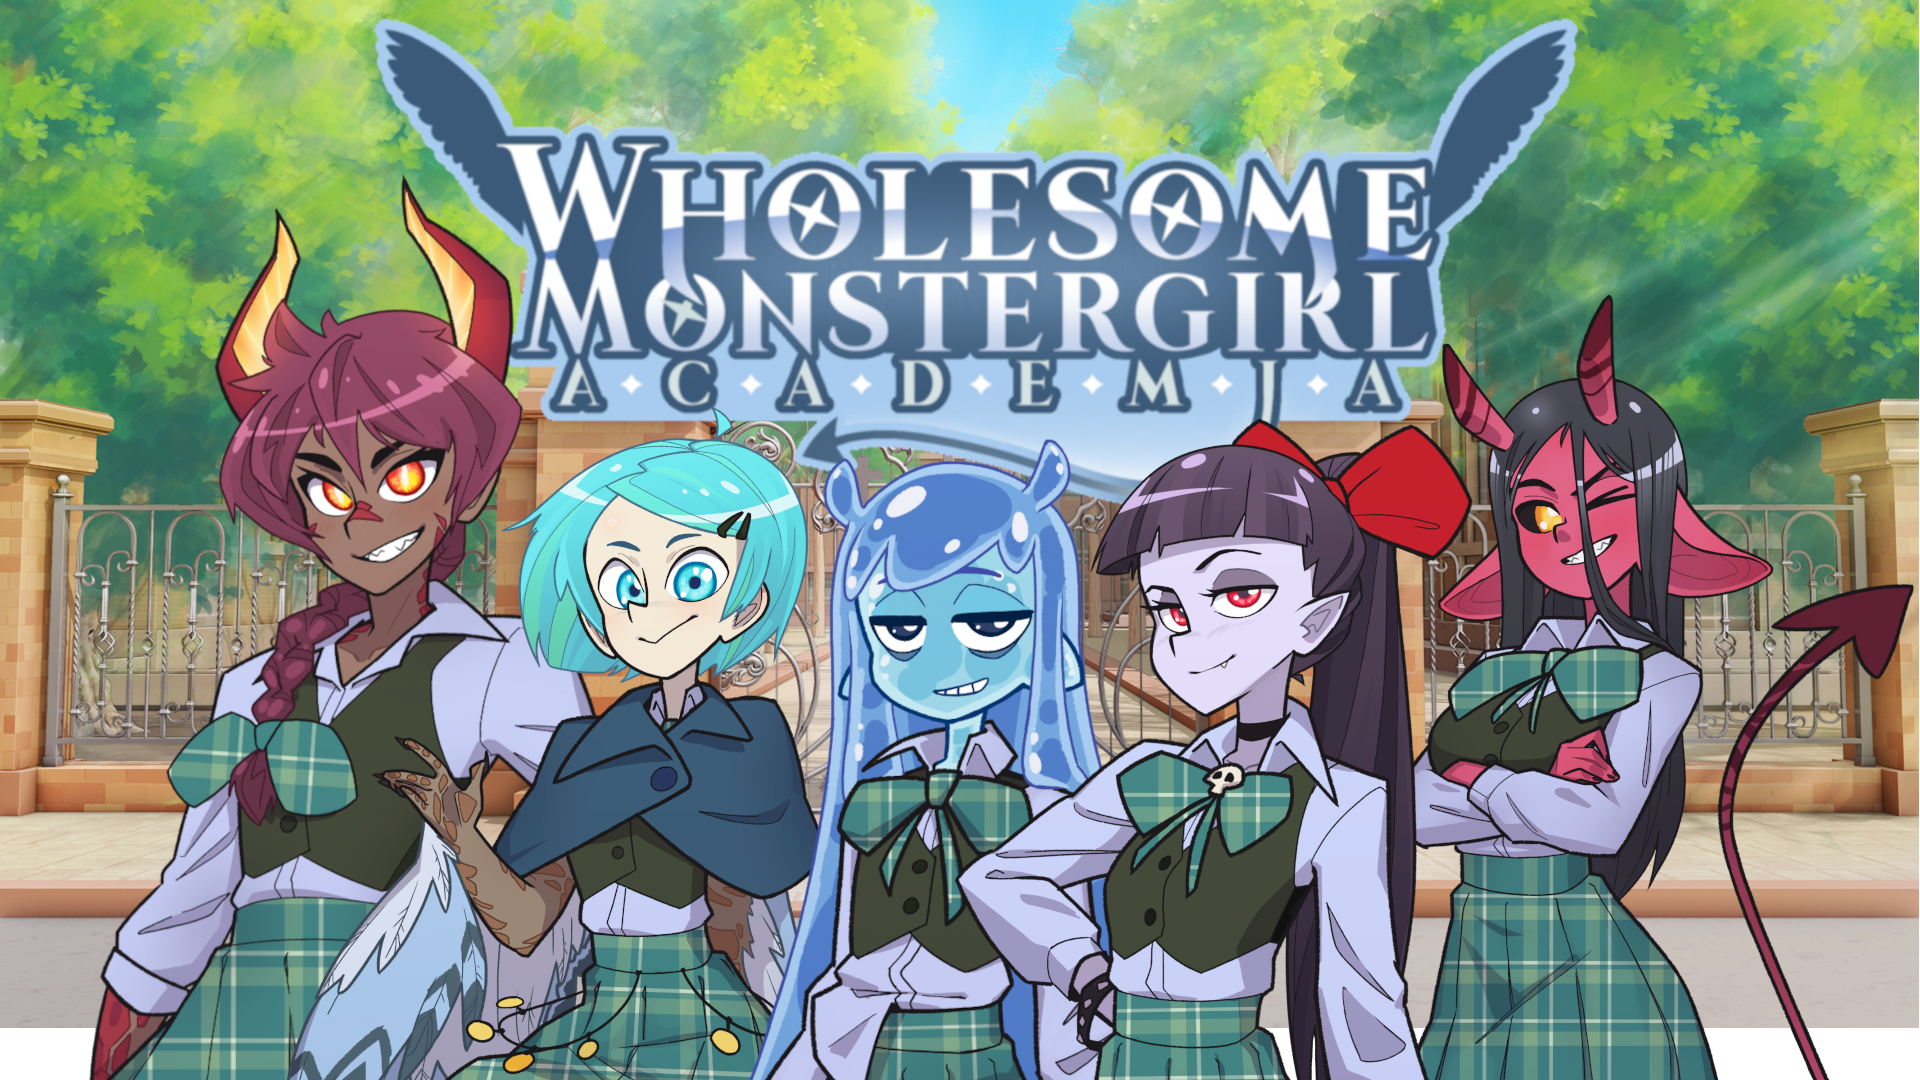 Update 0.1.2a - Improved GUI - Wholesome Monster Girl Academia by Yomic